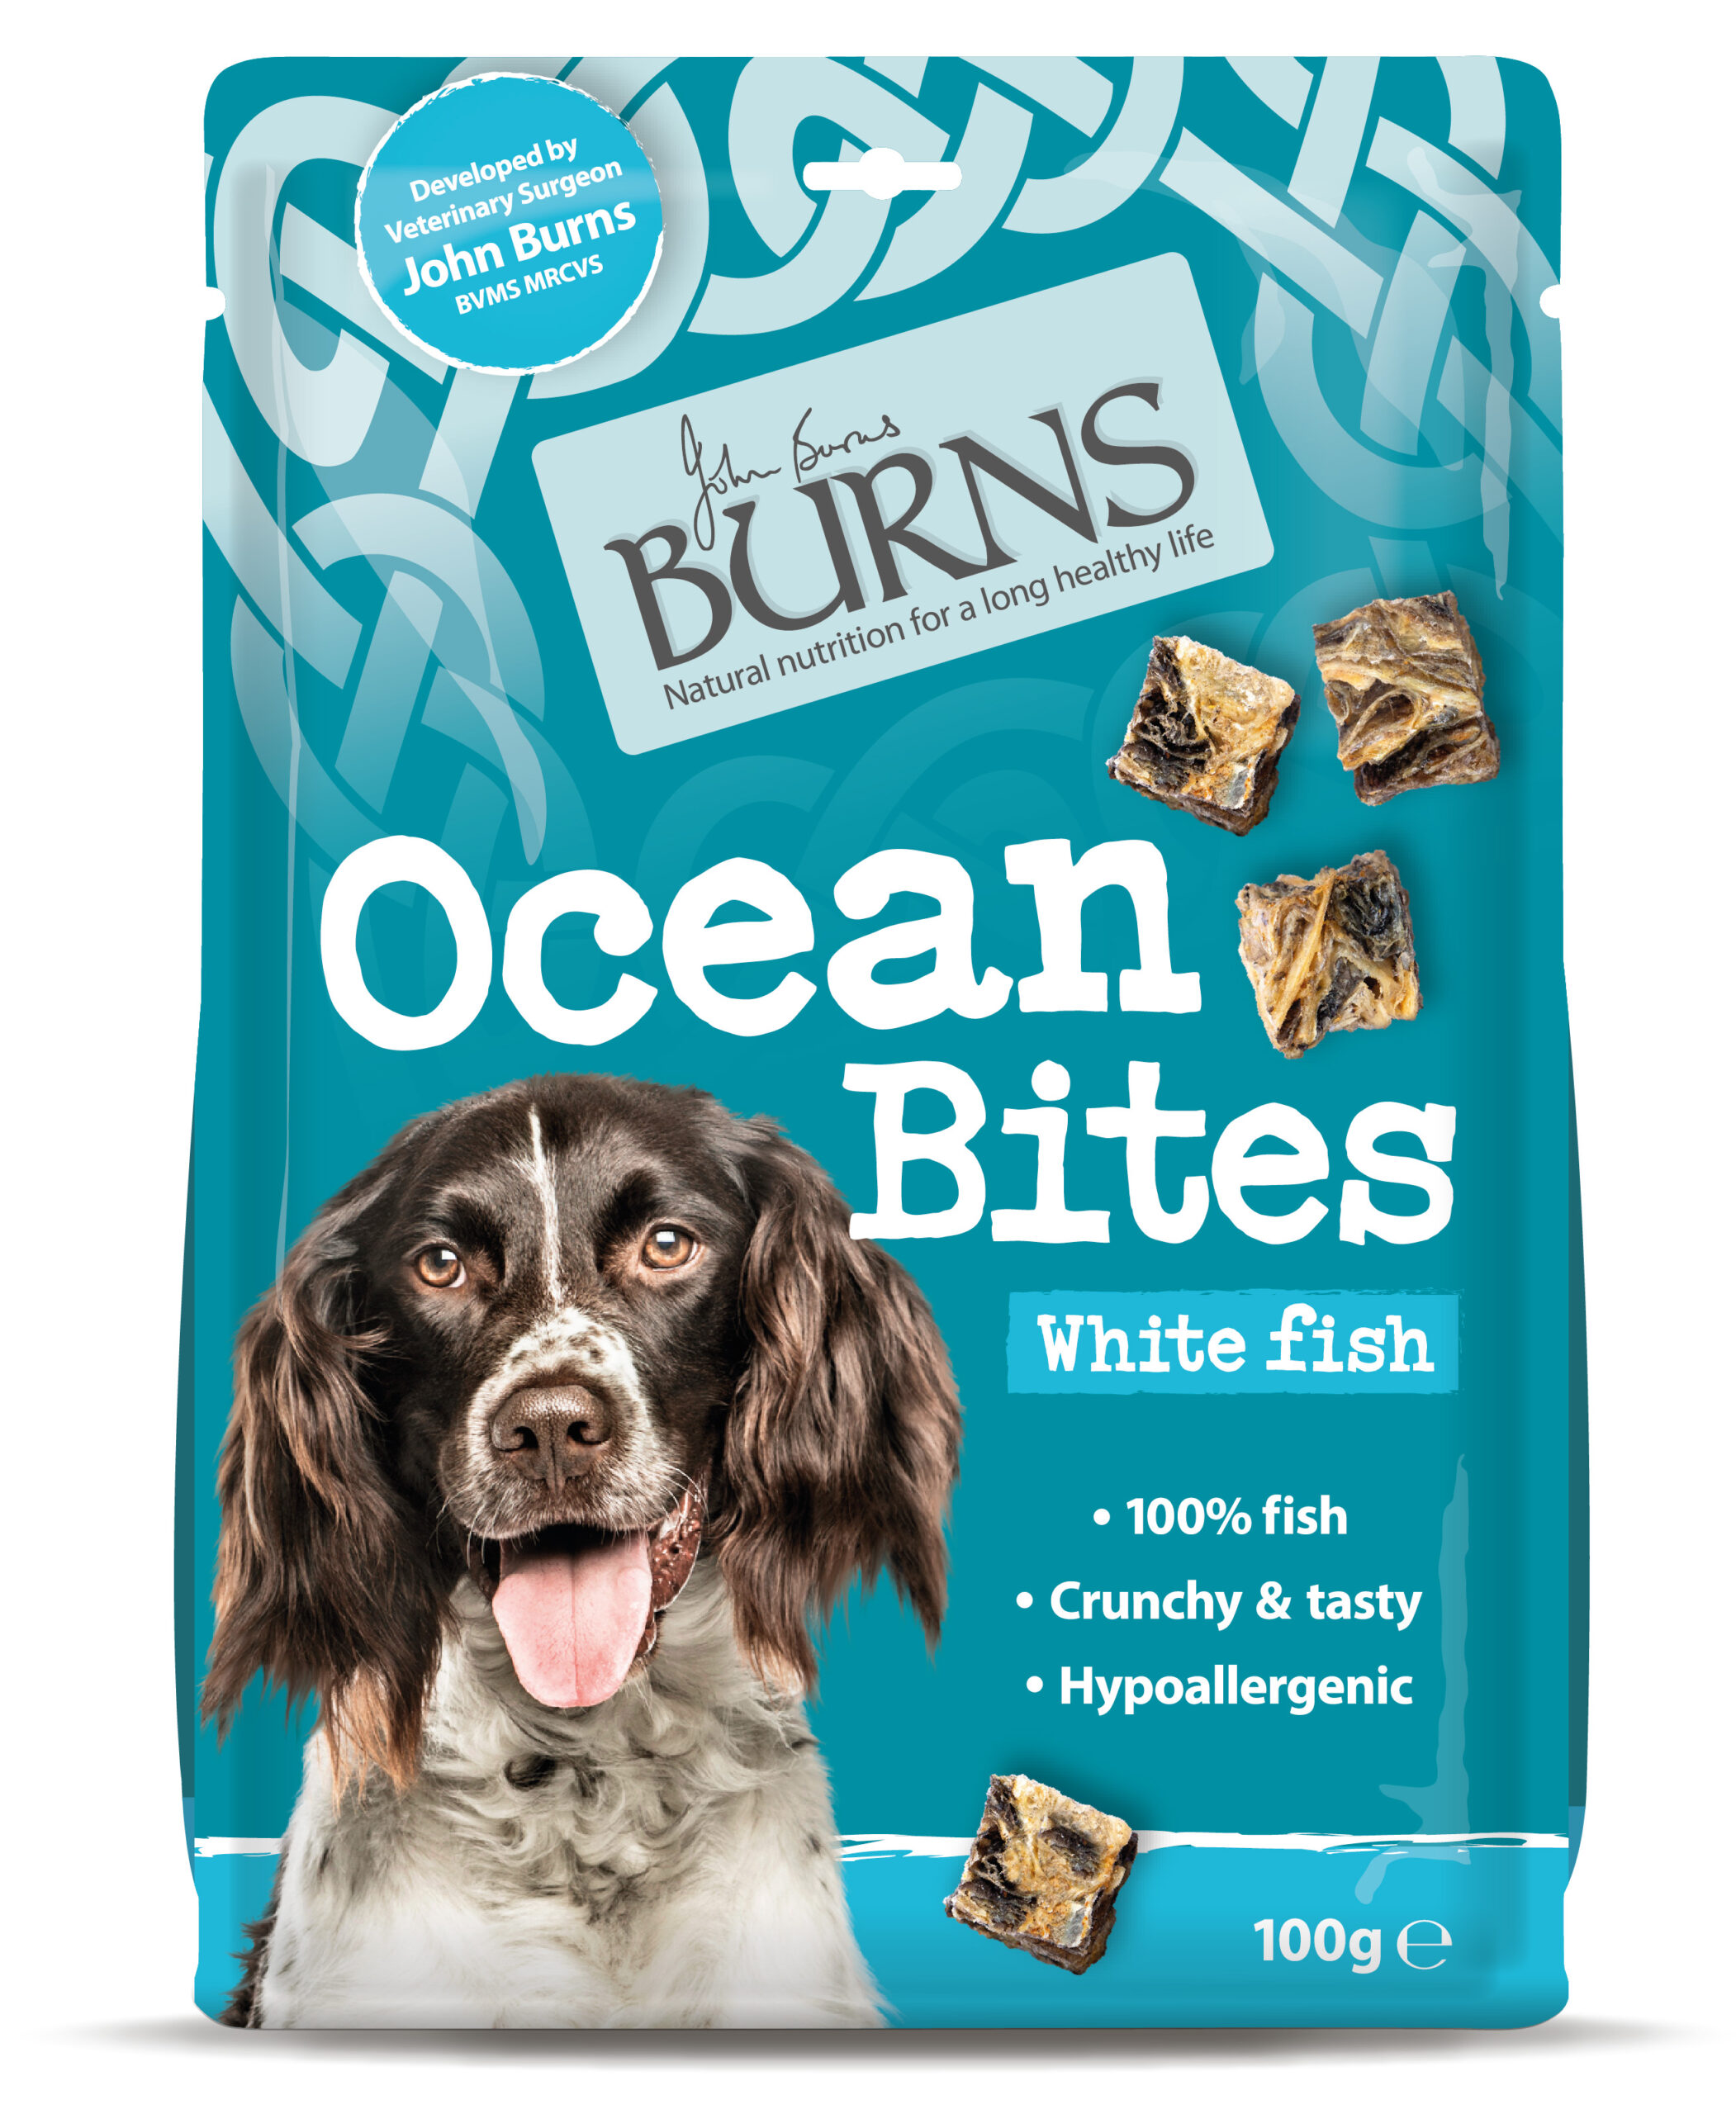 Suppliers of Ocean Bites With White Fish UK